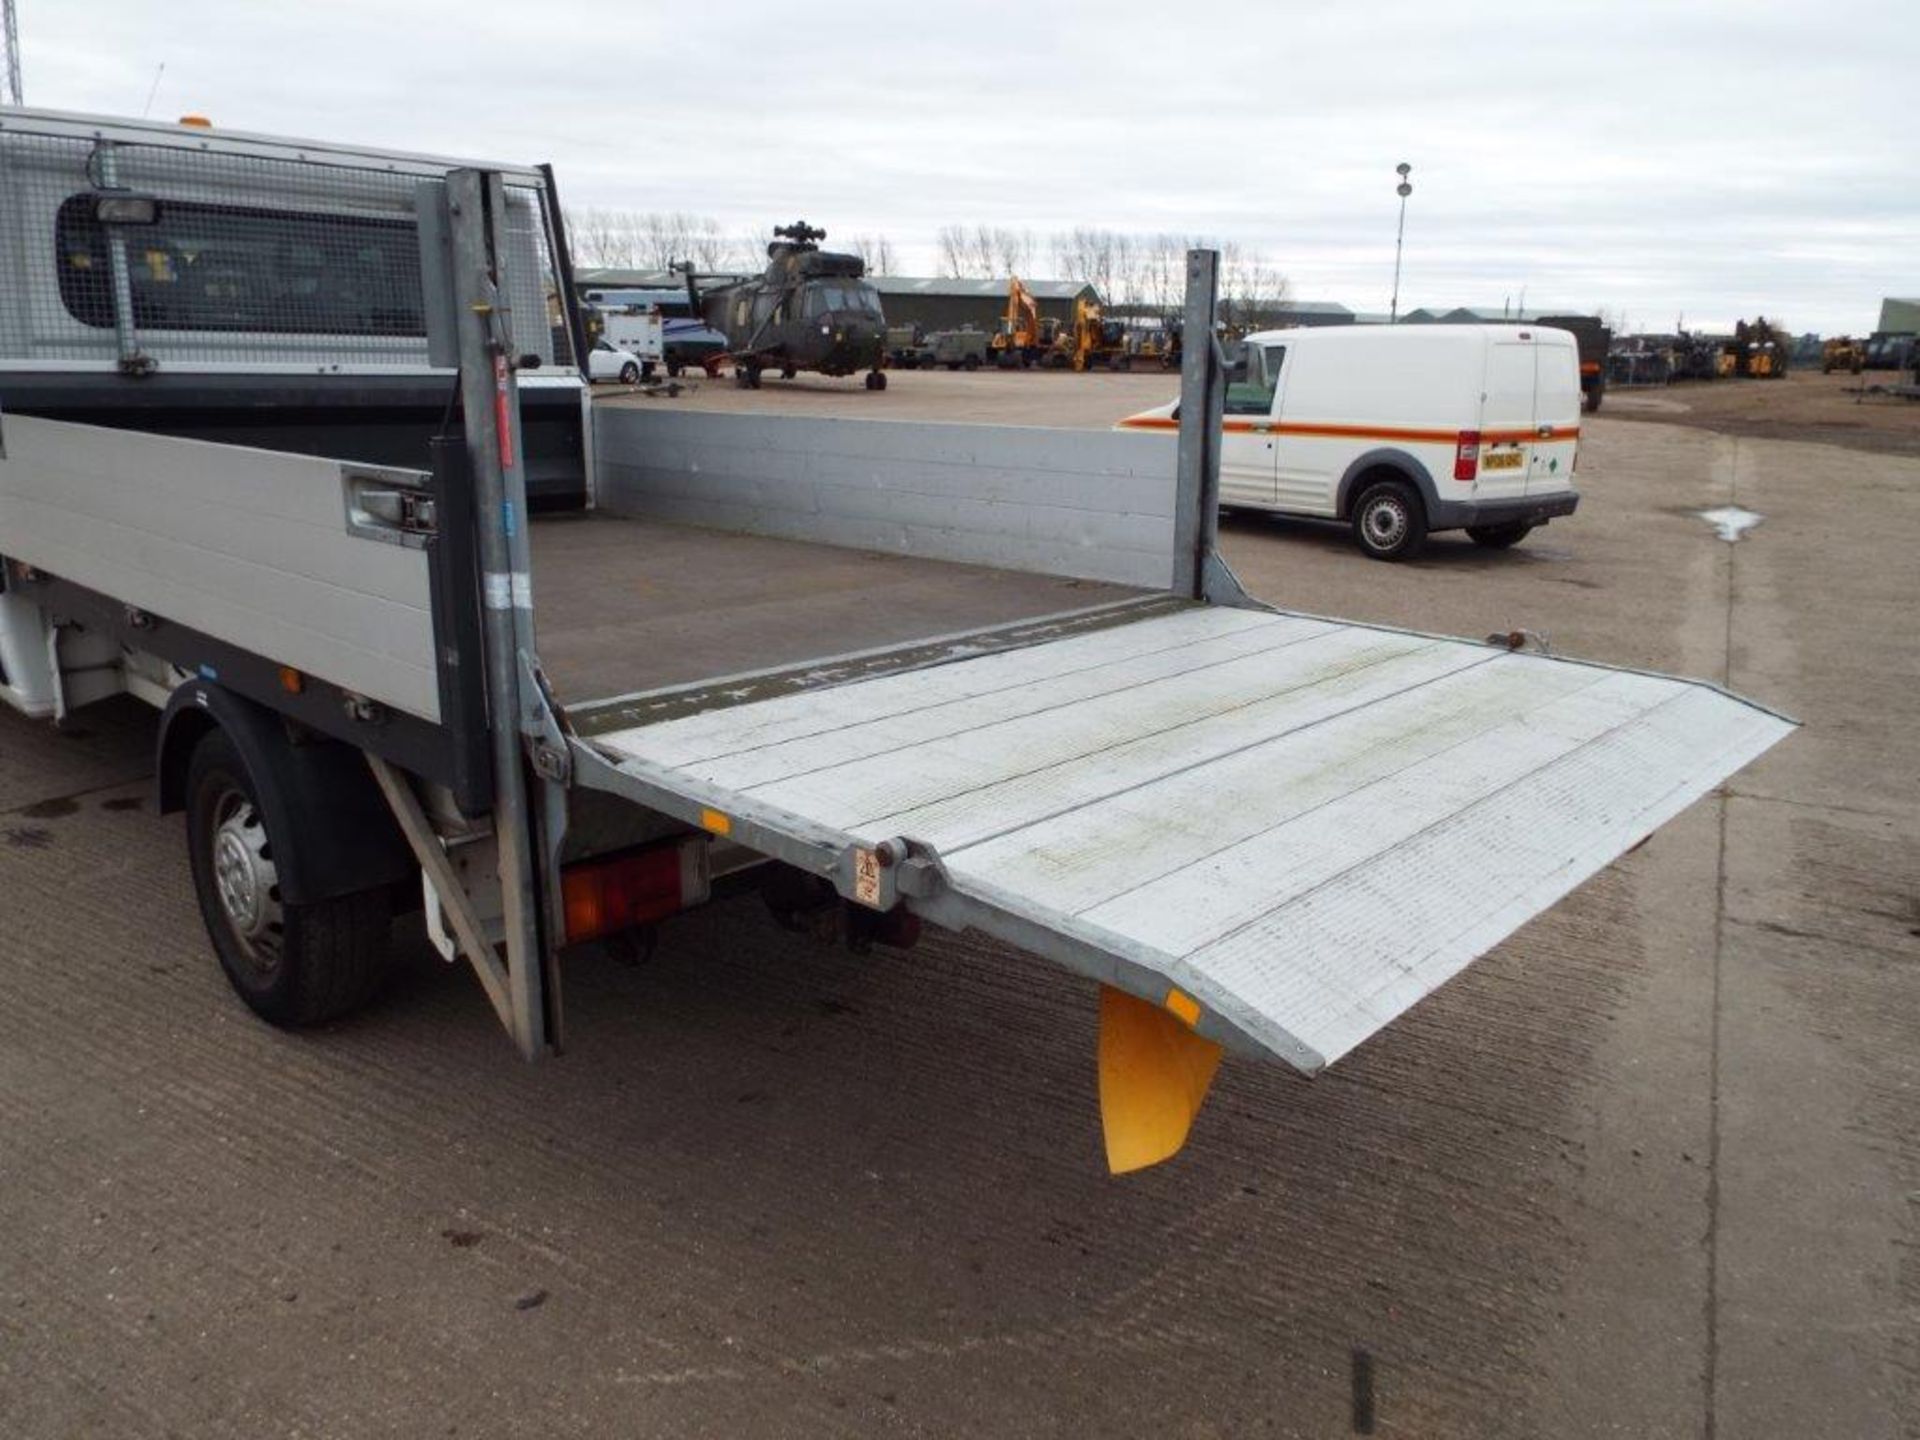 Citroen Relay 7 Seater Double Cab Dropside Pickup with 500kg Ratcliff Palfinger Tail Lift - Image 20 of 29